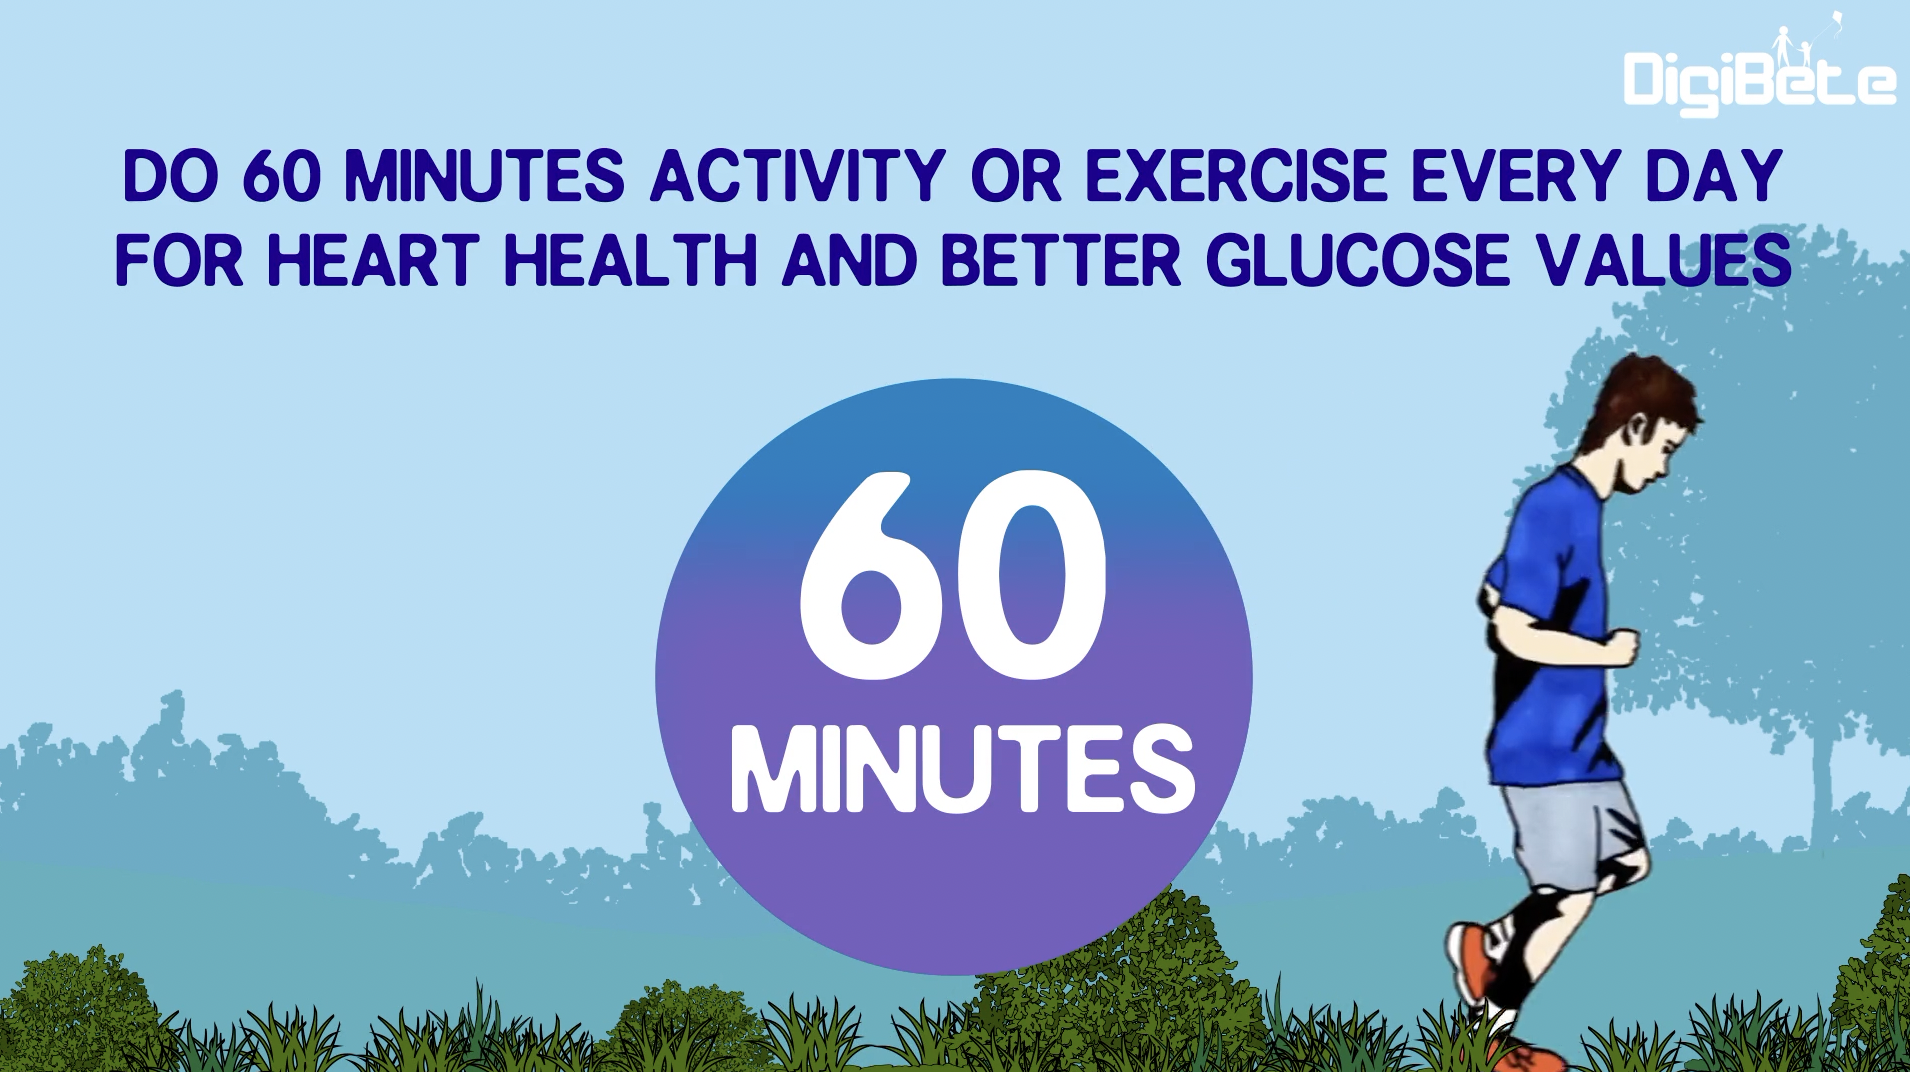 Diabetes Essentials: Do 60 Minutes Activity or Exercise Everyday